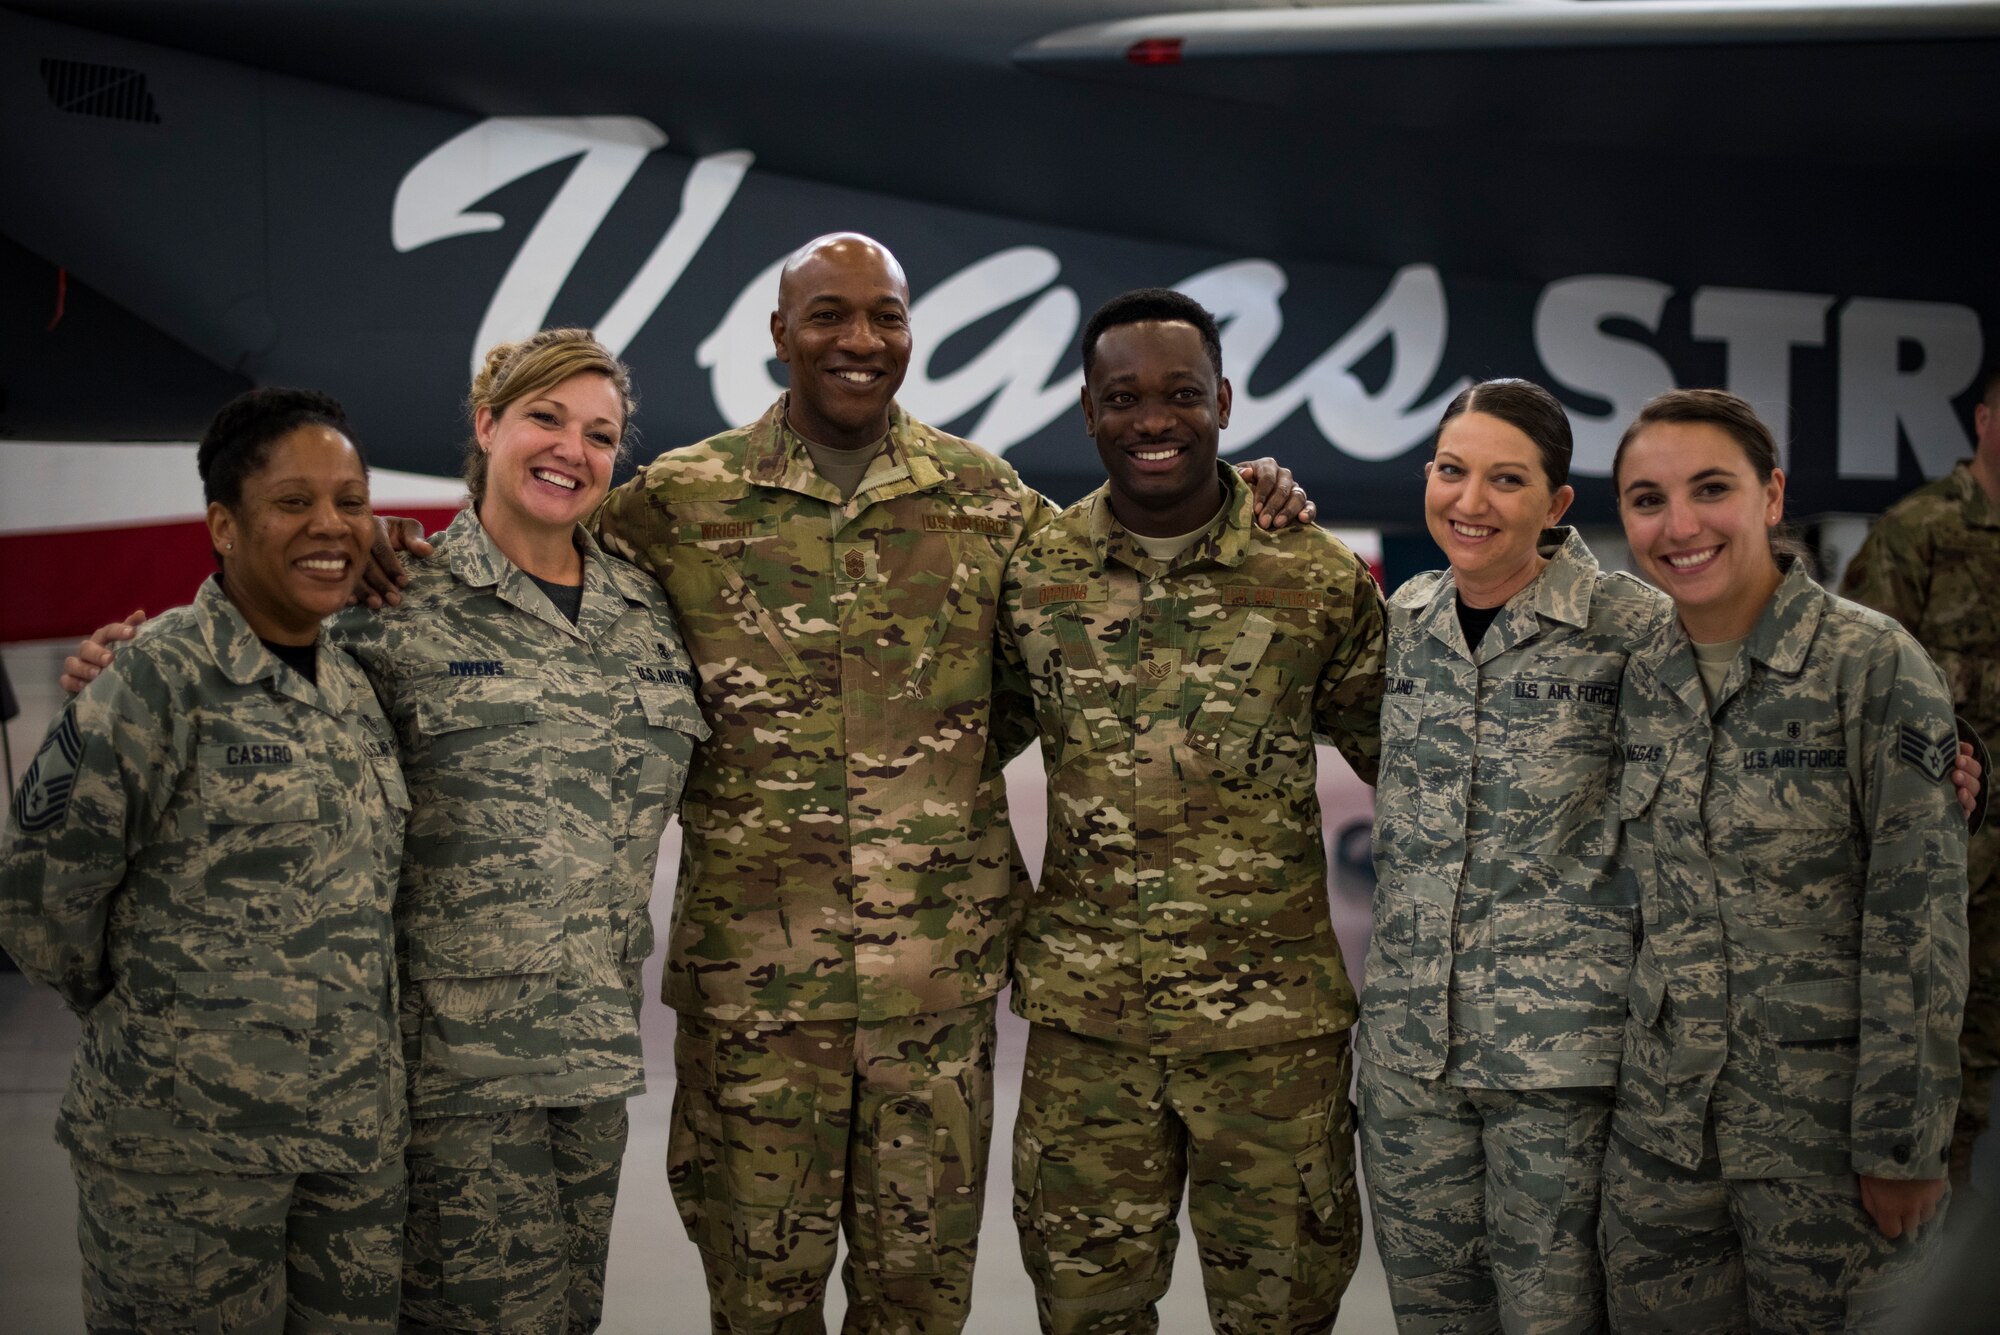 Chief Master Sgt. of the Air Force Kaleth O. Wright stands with Airmen assigned to the 99th Medical Group Oct. 19, 2018 at Nellis Air Force Base, Nevada. Wright visited multiple areas on base to meet Airmen and learn about what their role is at Nellis AFB. (U.S. Air Force photo by Airman 1st Class Andrew D. Sarver)